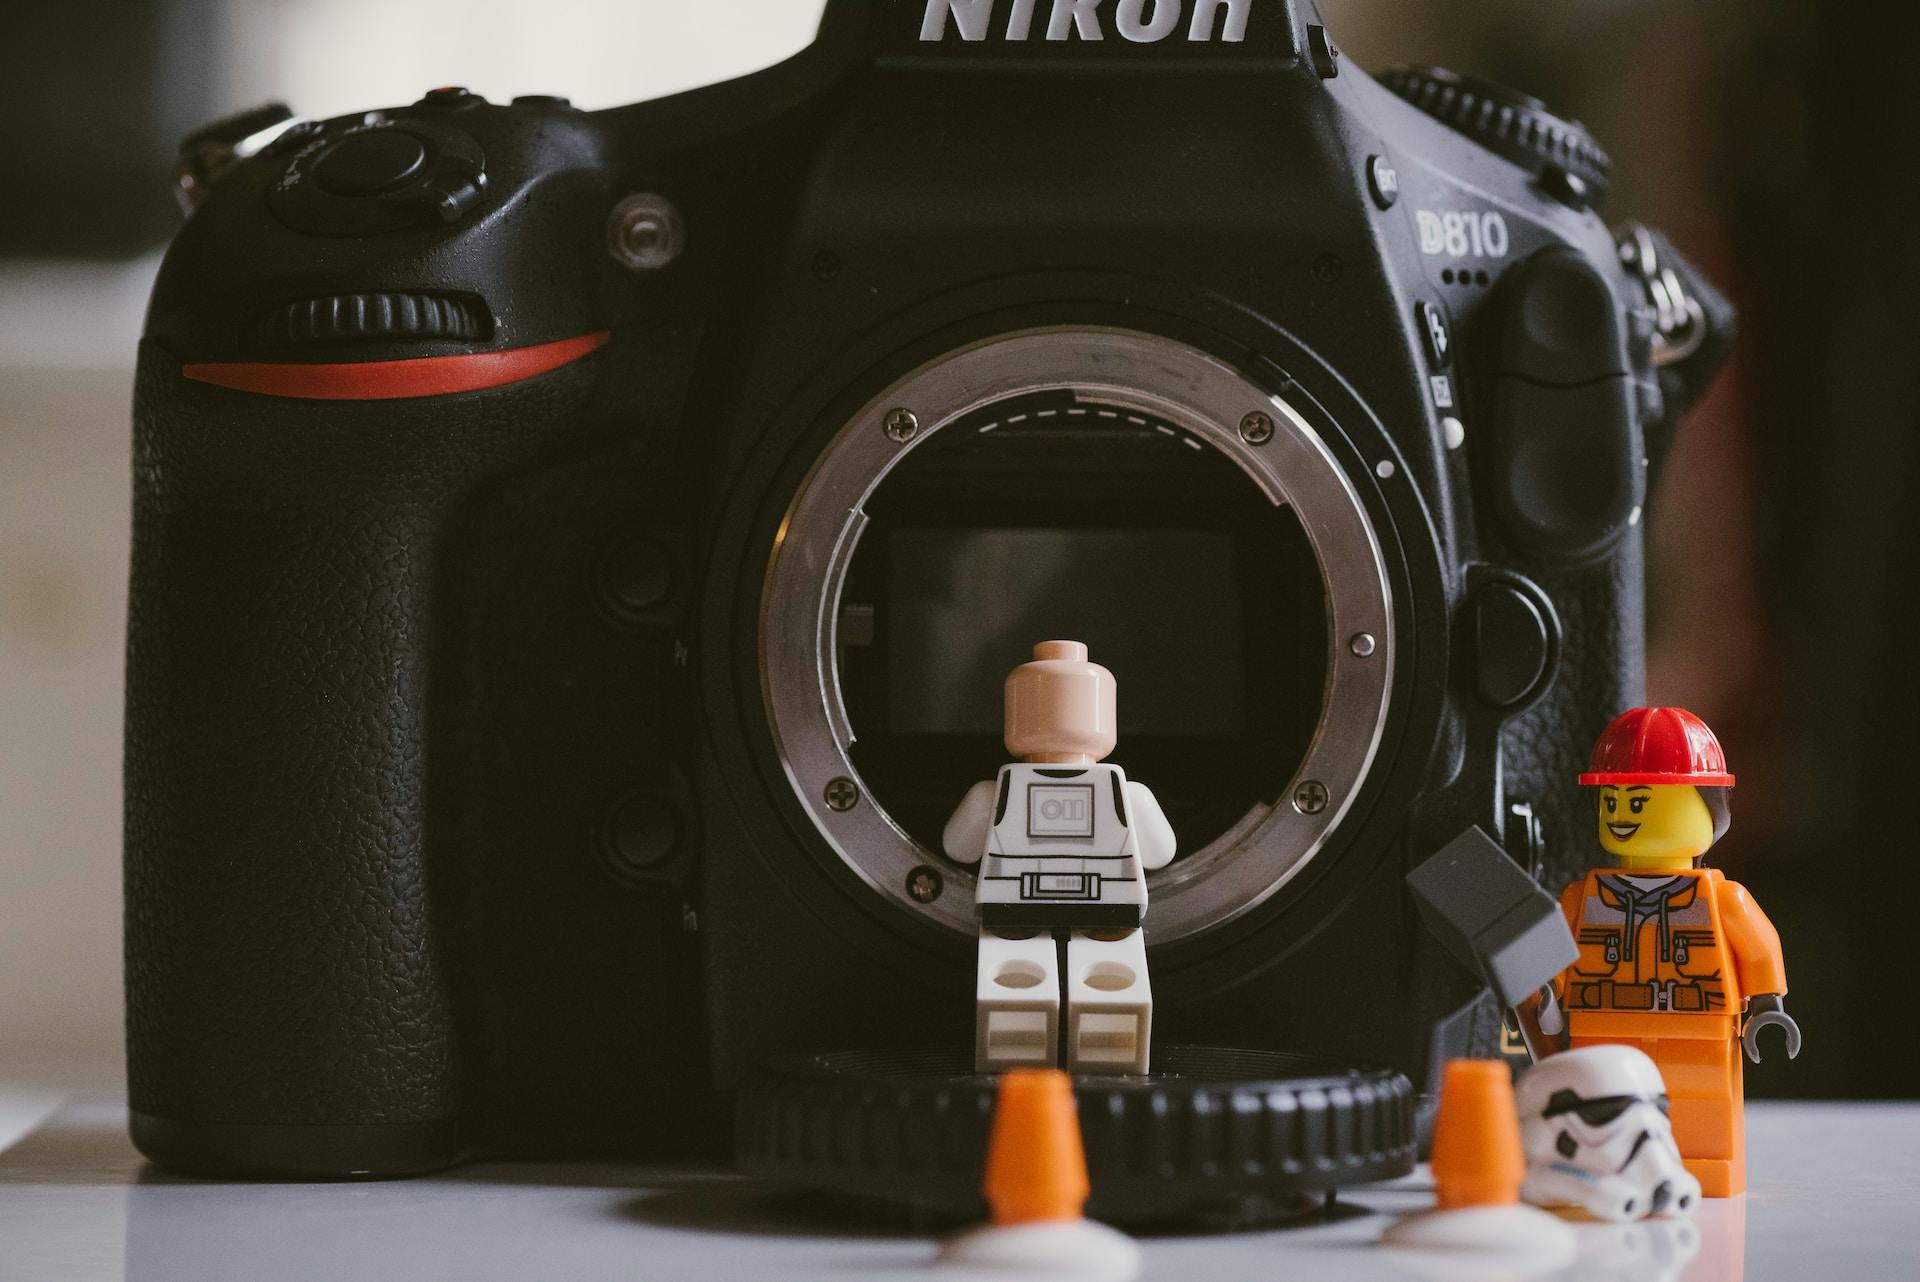 Lego Storm Trooper looking into the lens of a digital camera